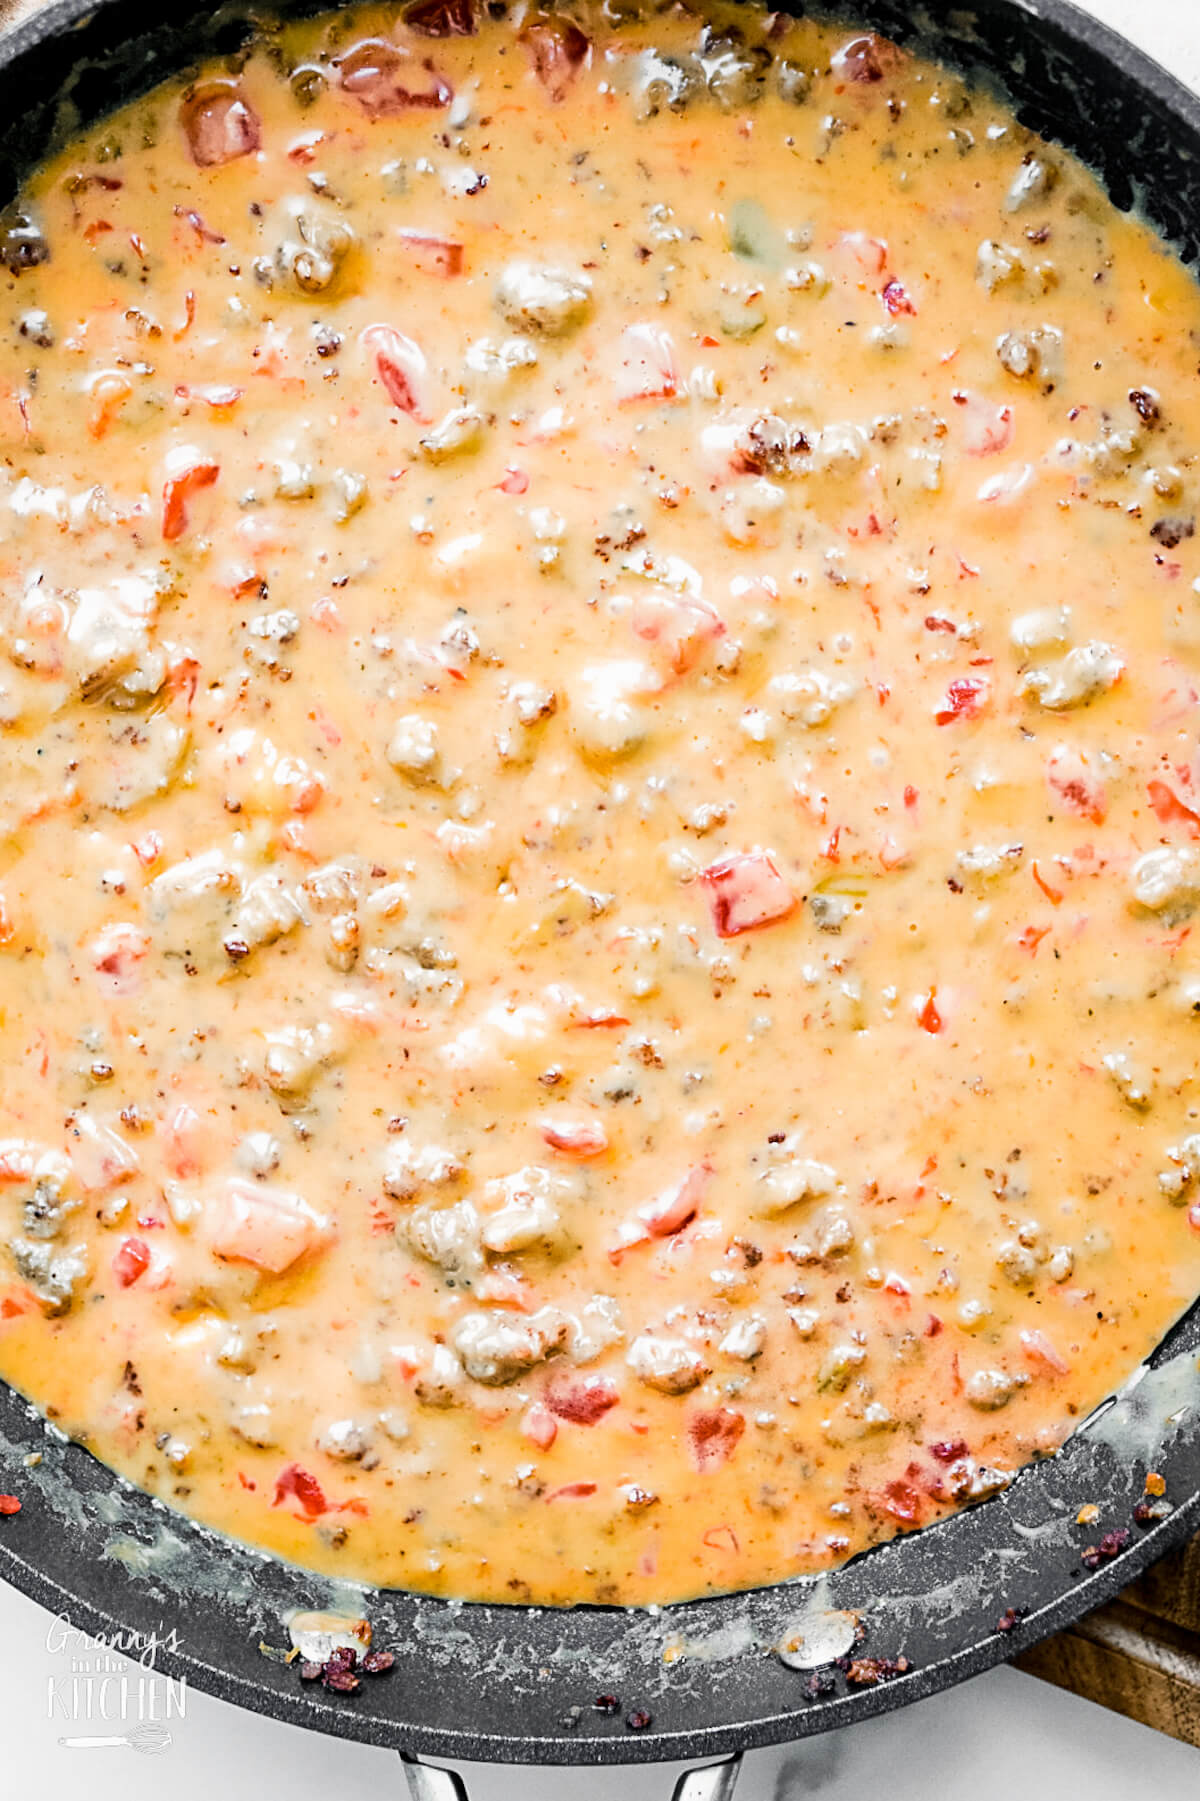 skillet of hot Rotel cheese dip